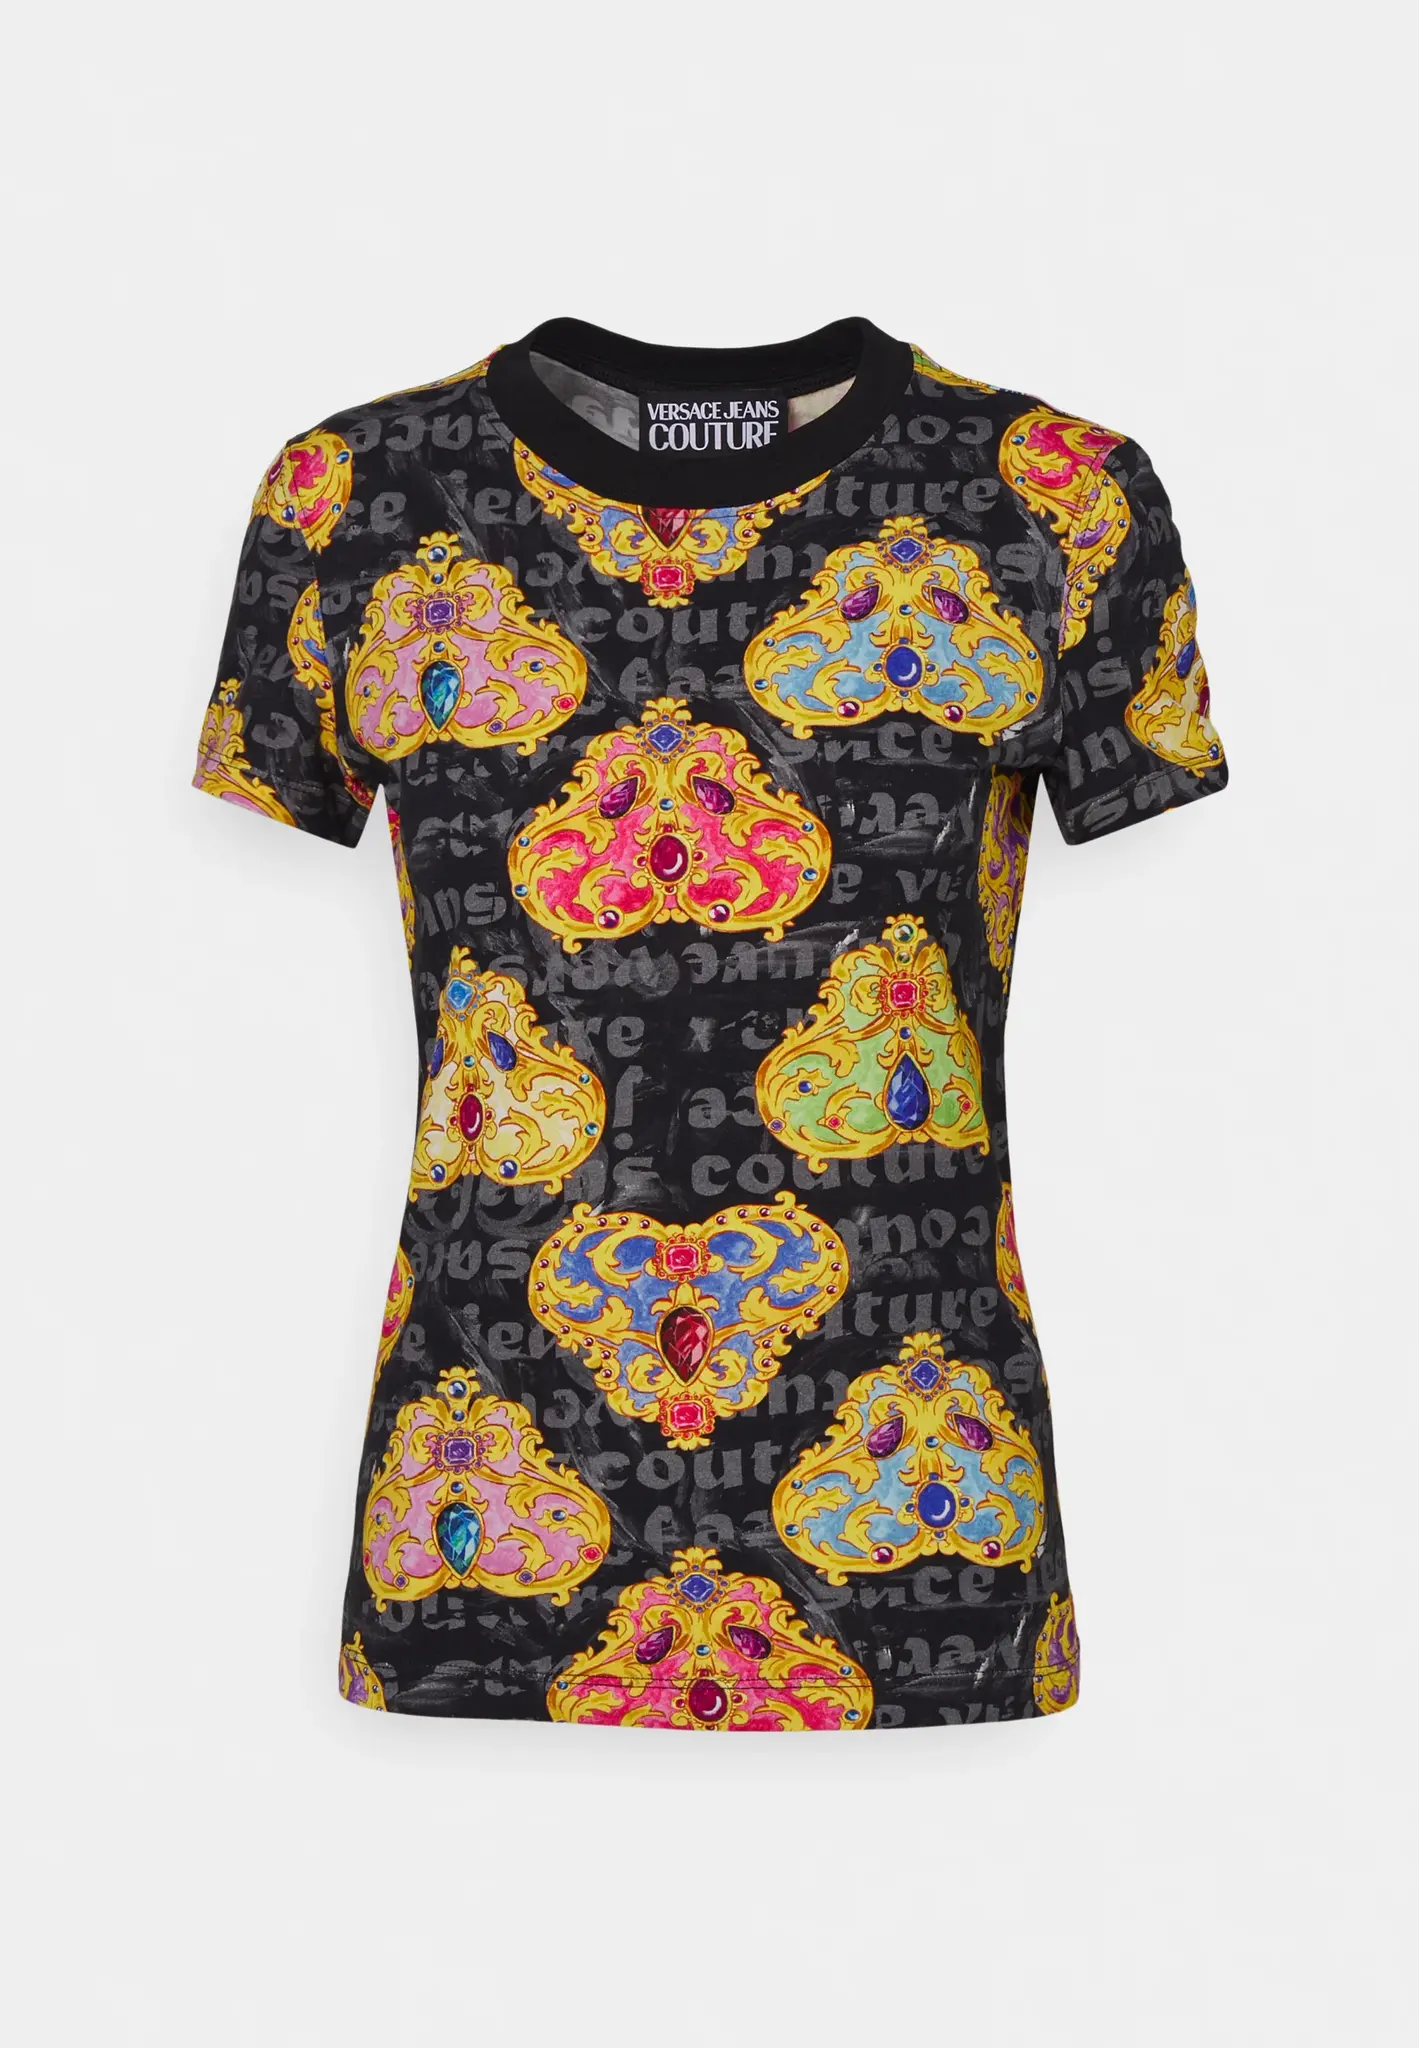 Afbeelding van Versace Jeans Versace jeans couture t-shirt heart couture